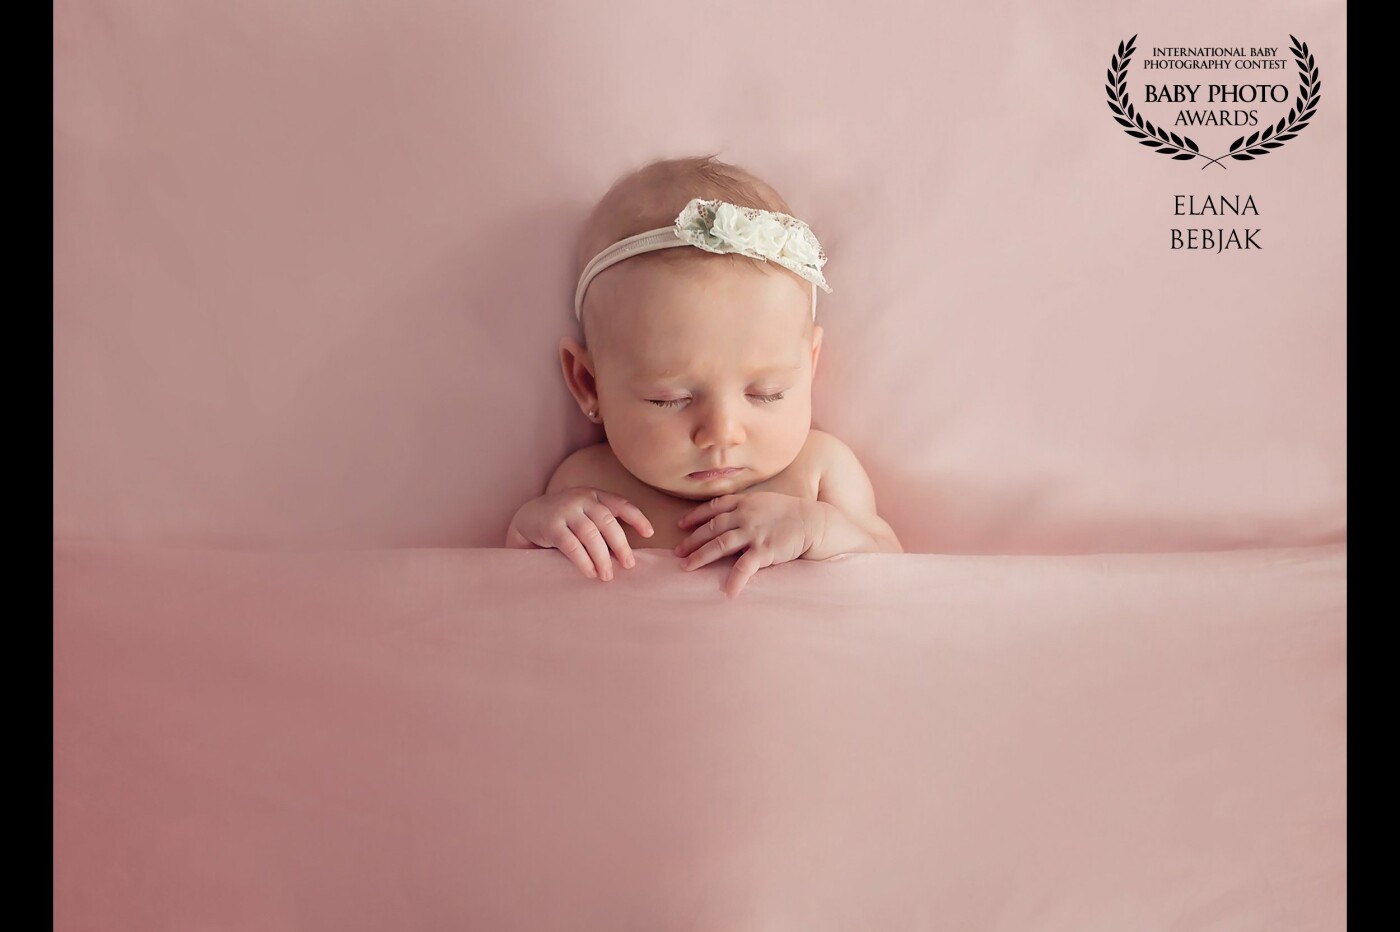 There was just something about the softness and sweetness of this portrait I took of my youngest baby girl that resonates with me...the light, how peaceful she is, and just the innocence portrayed. We have this portrait framed and hanging in our home for us to enjoy every day.